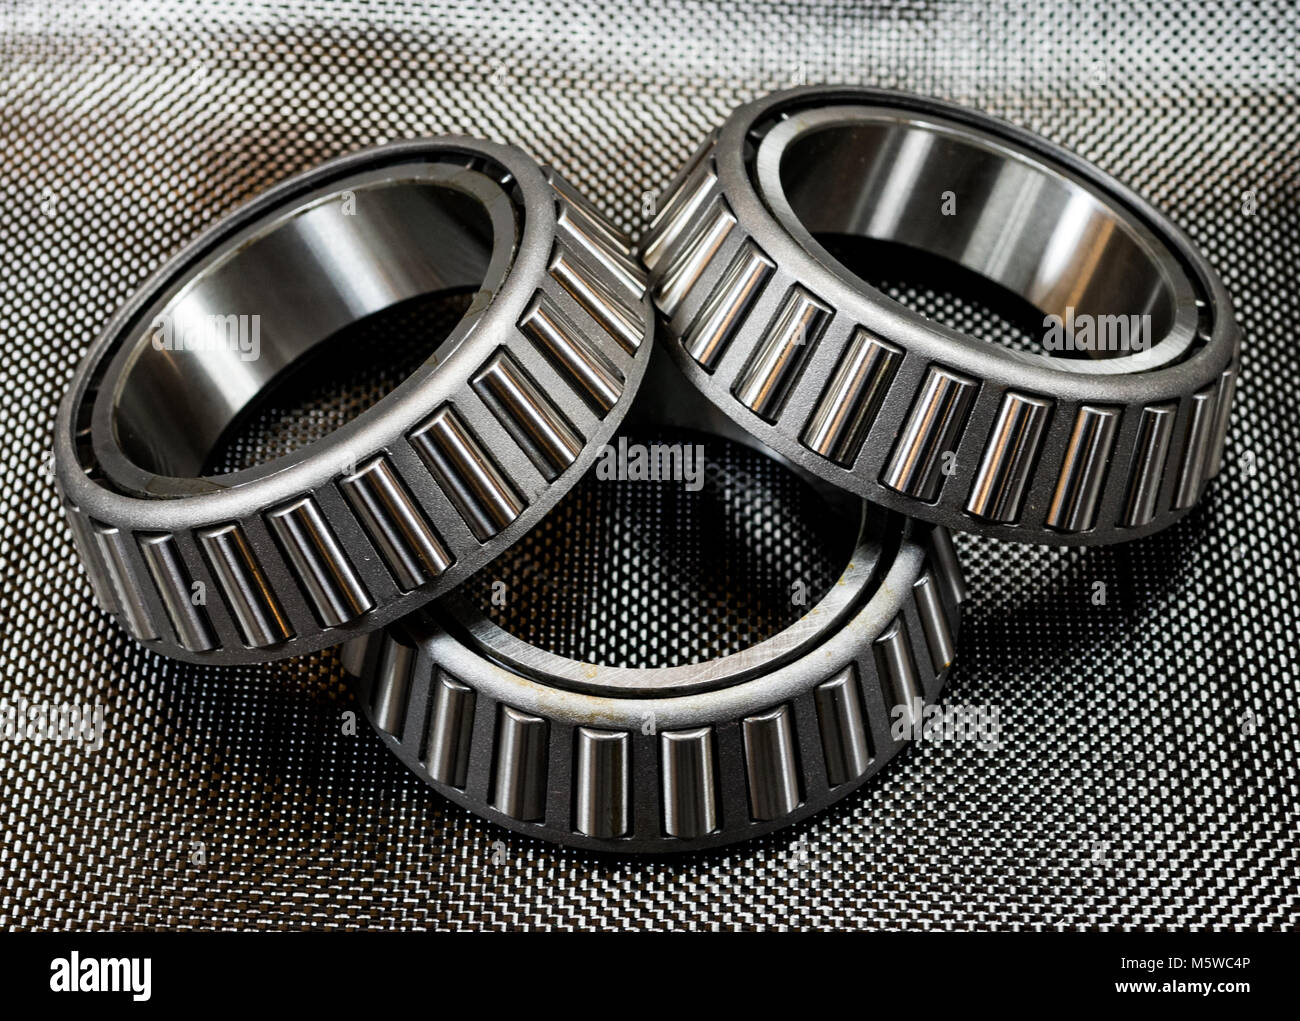 3 antique automotive tapered roller bearings on plain weave carbon fiber. Stock Photo